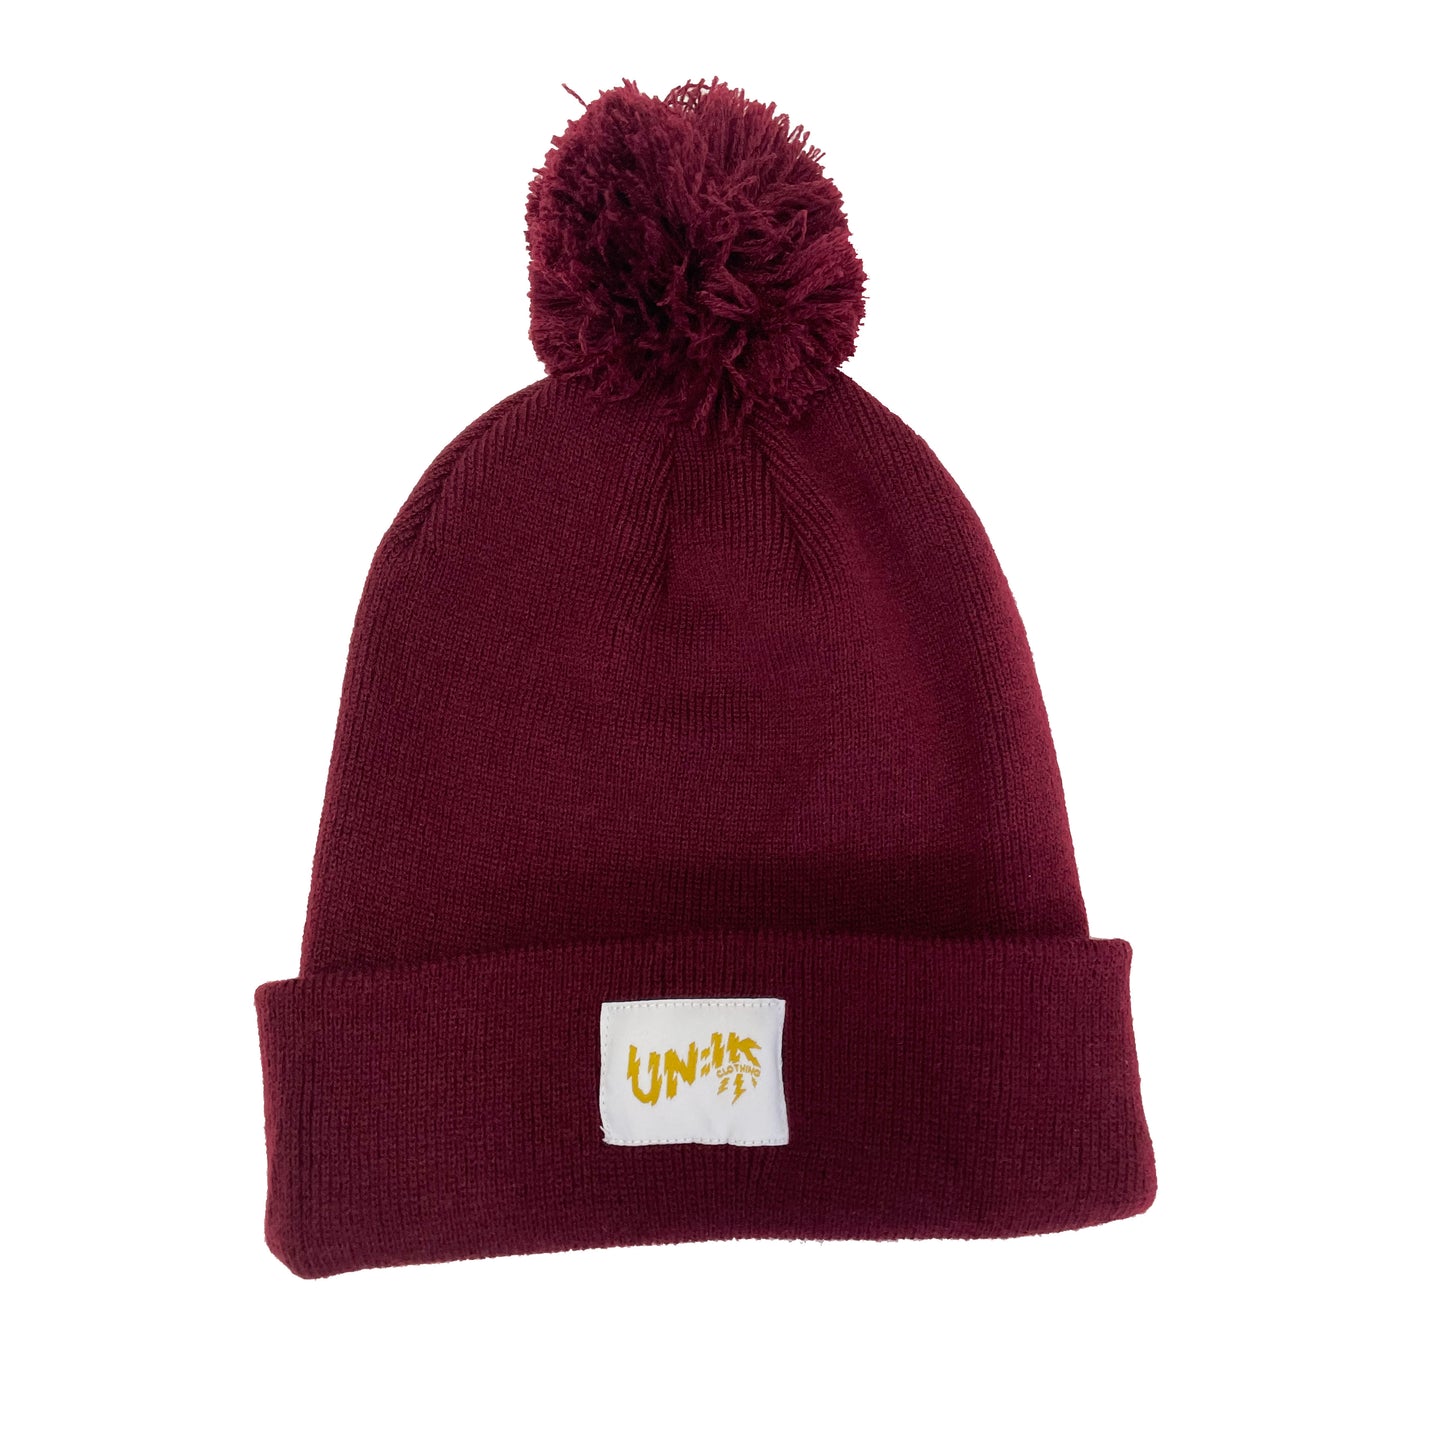 Load image into Gallery viewer, Essentials Label Bobble Hat Beanie
